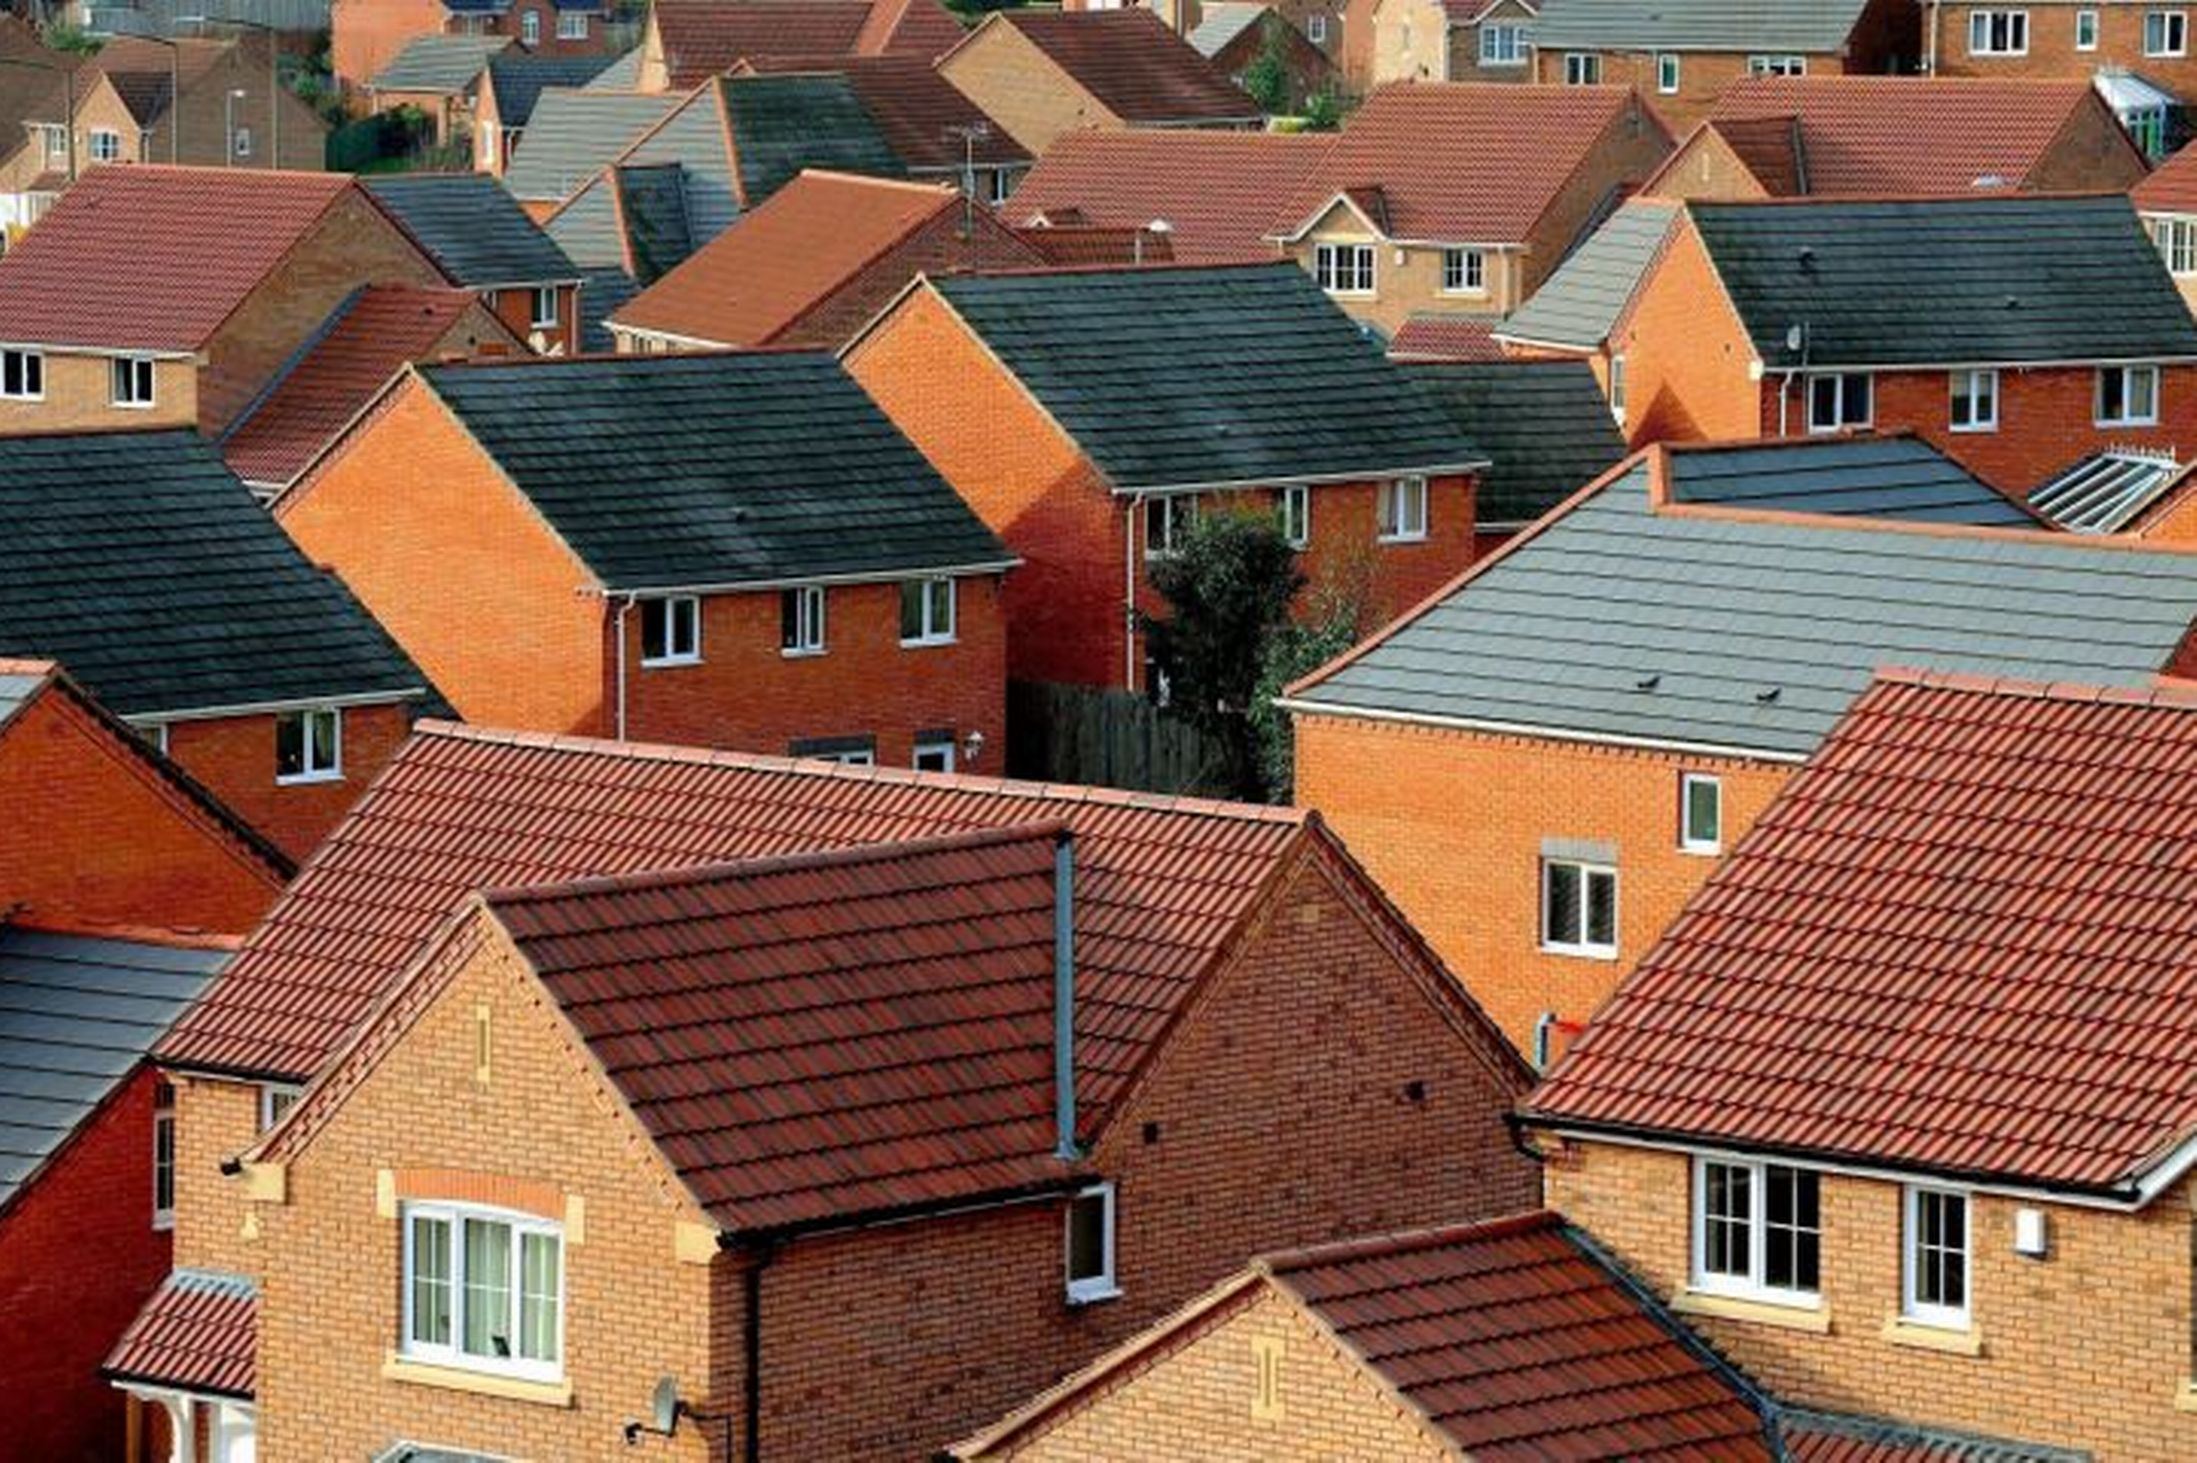 Majority expect housing prices to rise in the UK